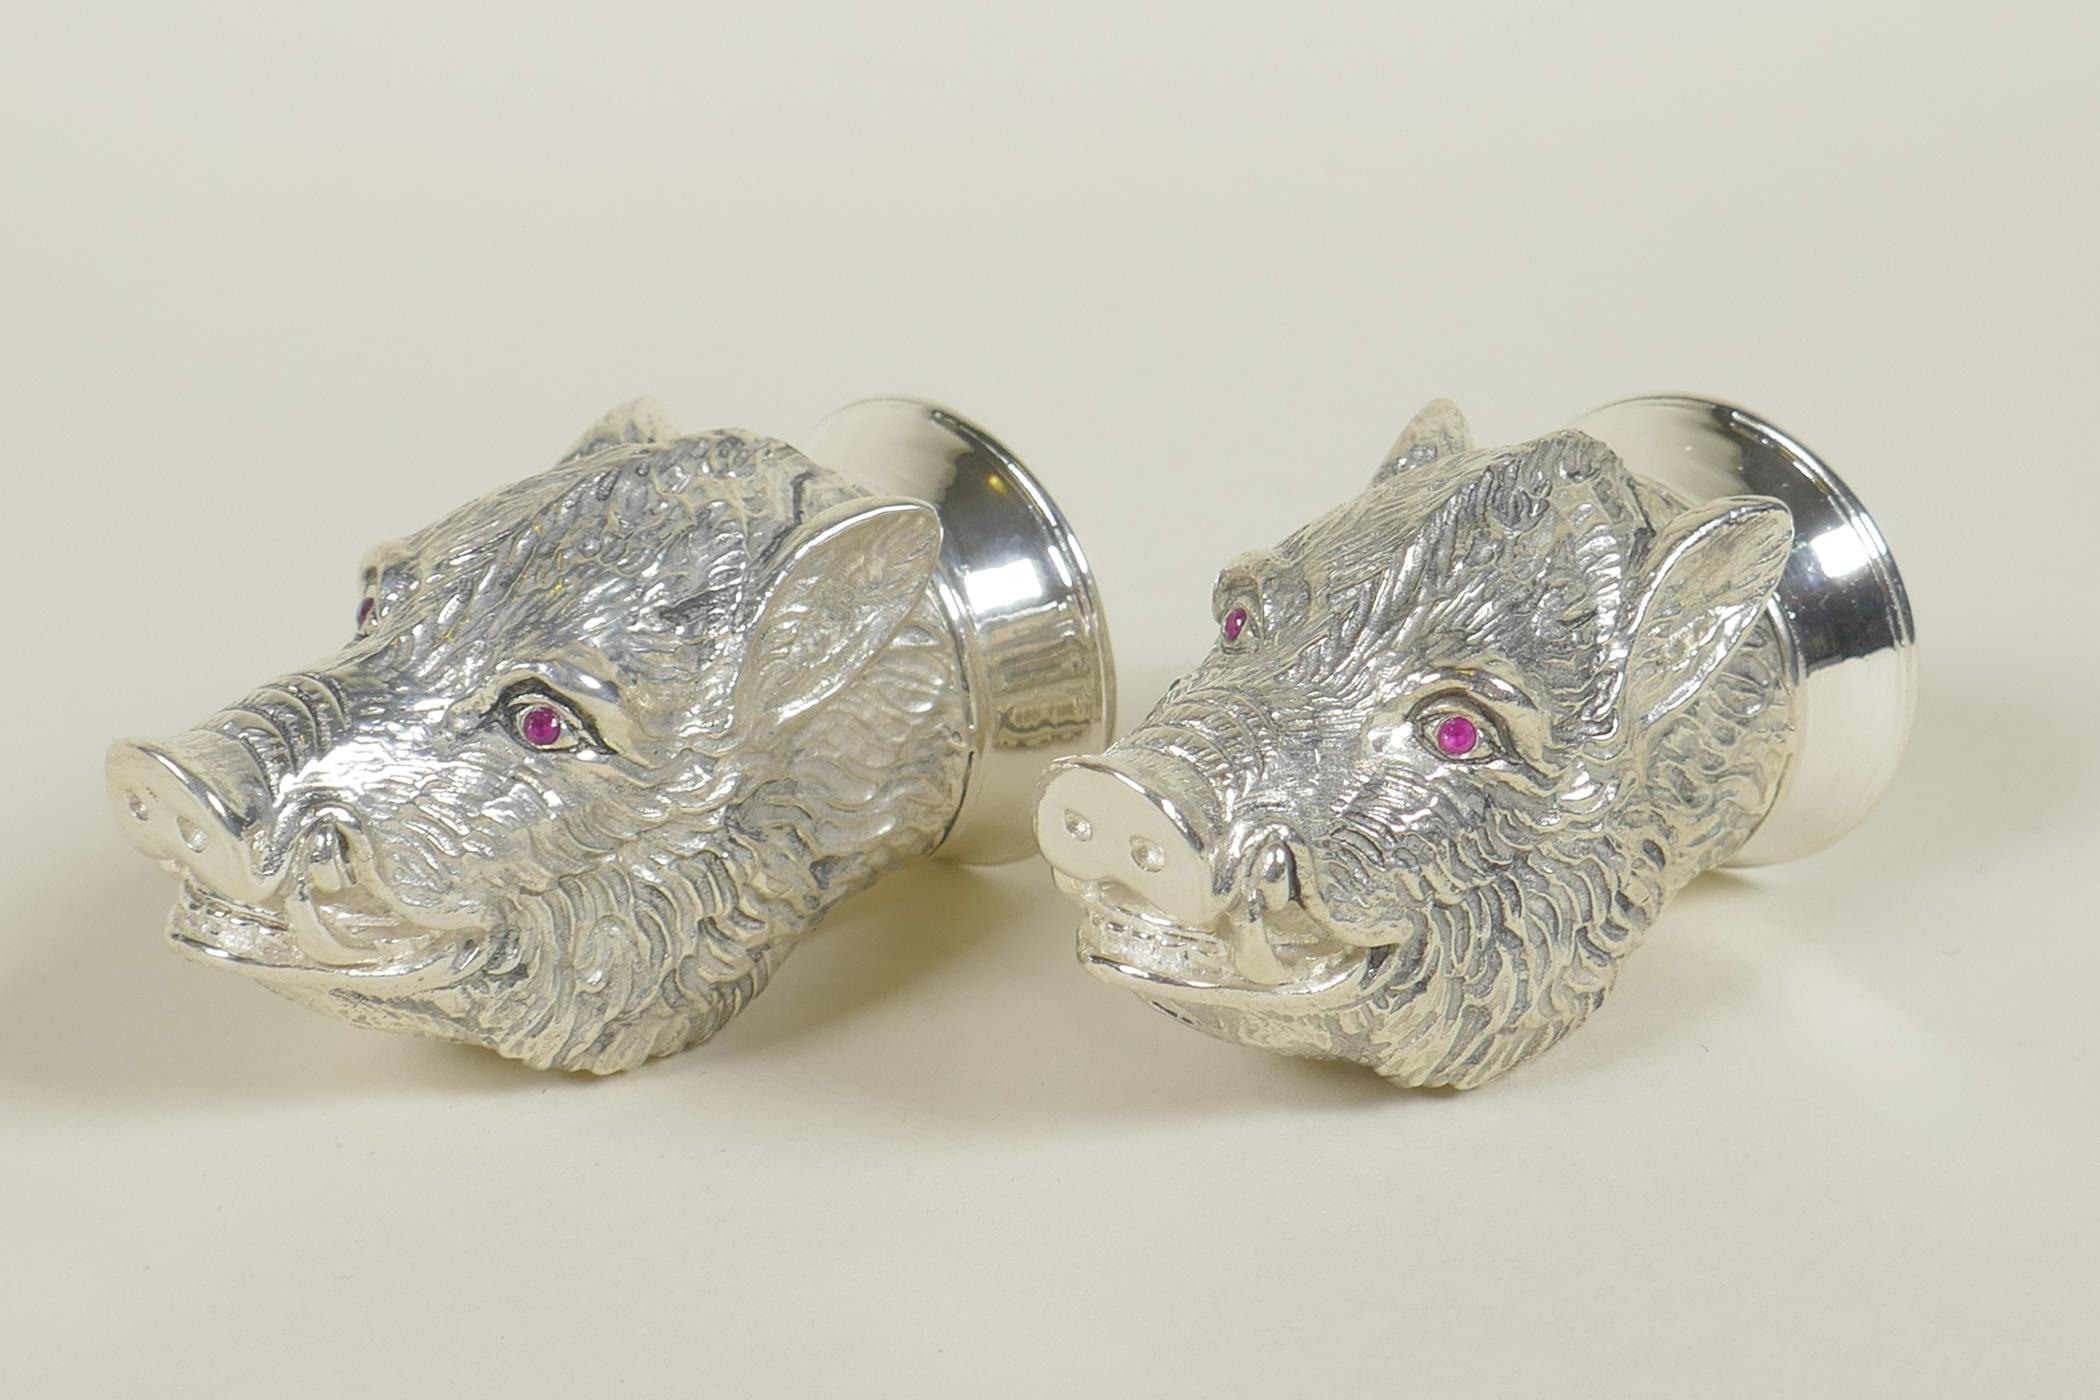 A pair of silver plated salt and pepper cruets in the form of boars' heads, 2" long - Image 2 of 4